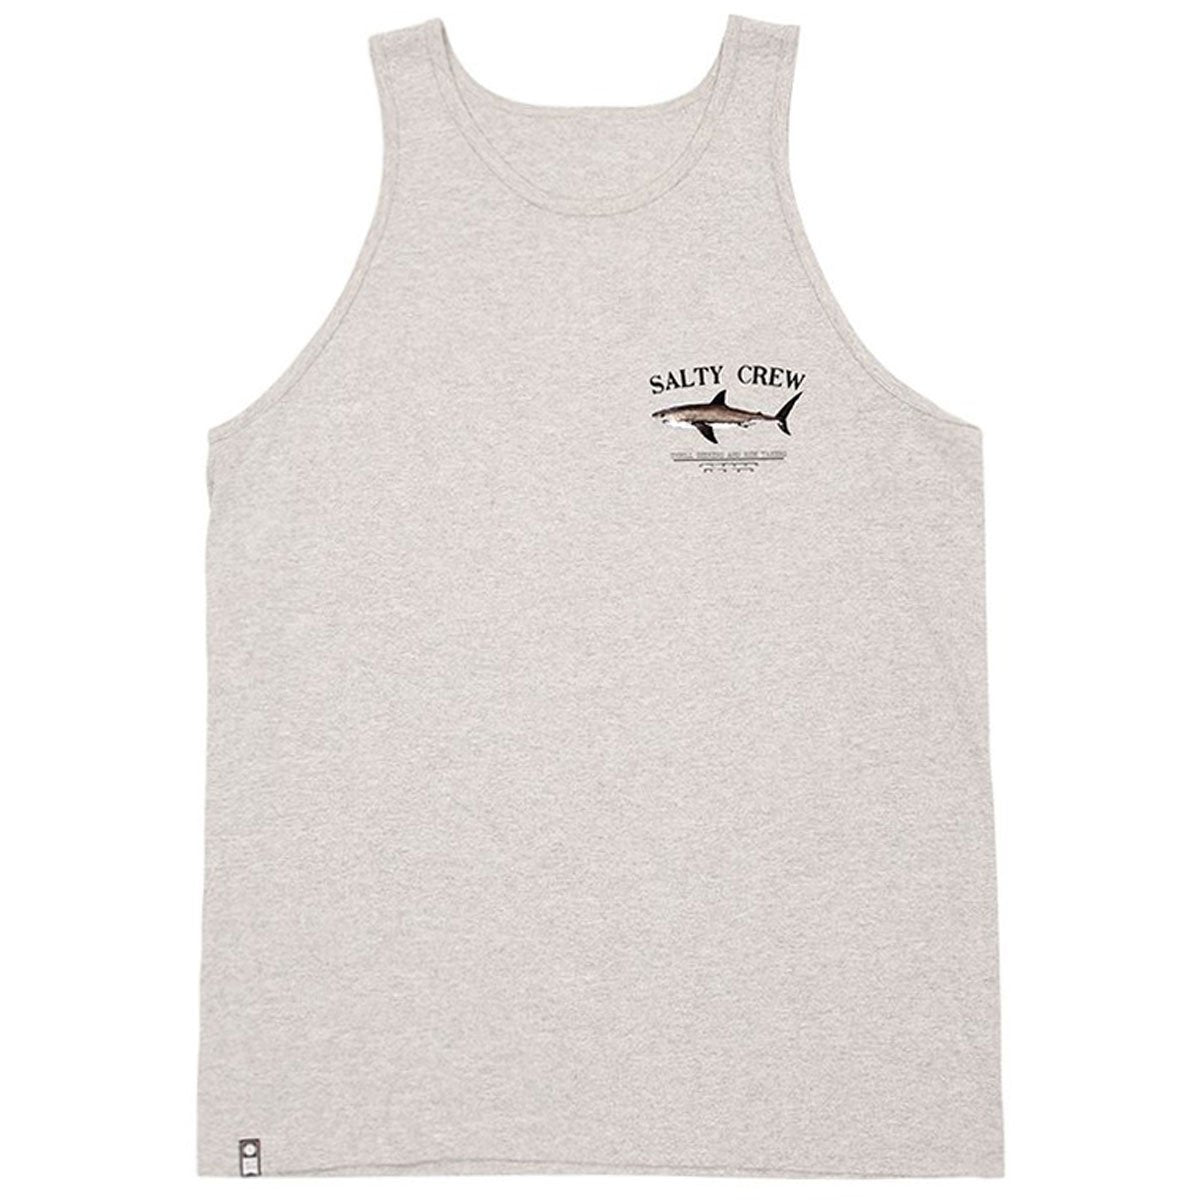 Salty Crew Bruce Tank Top - Athletic Heather image 1